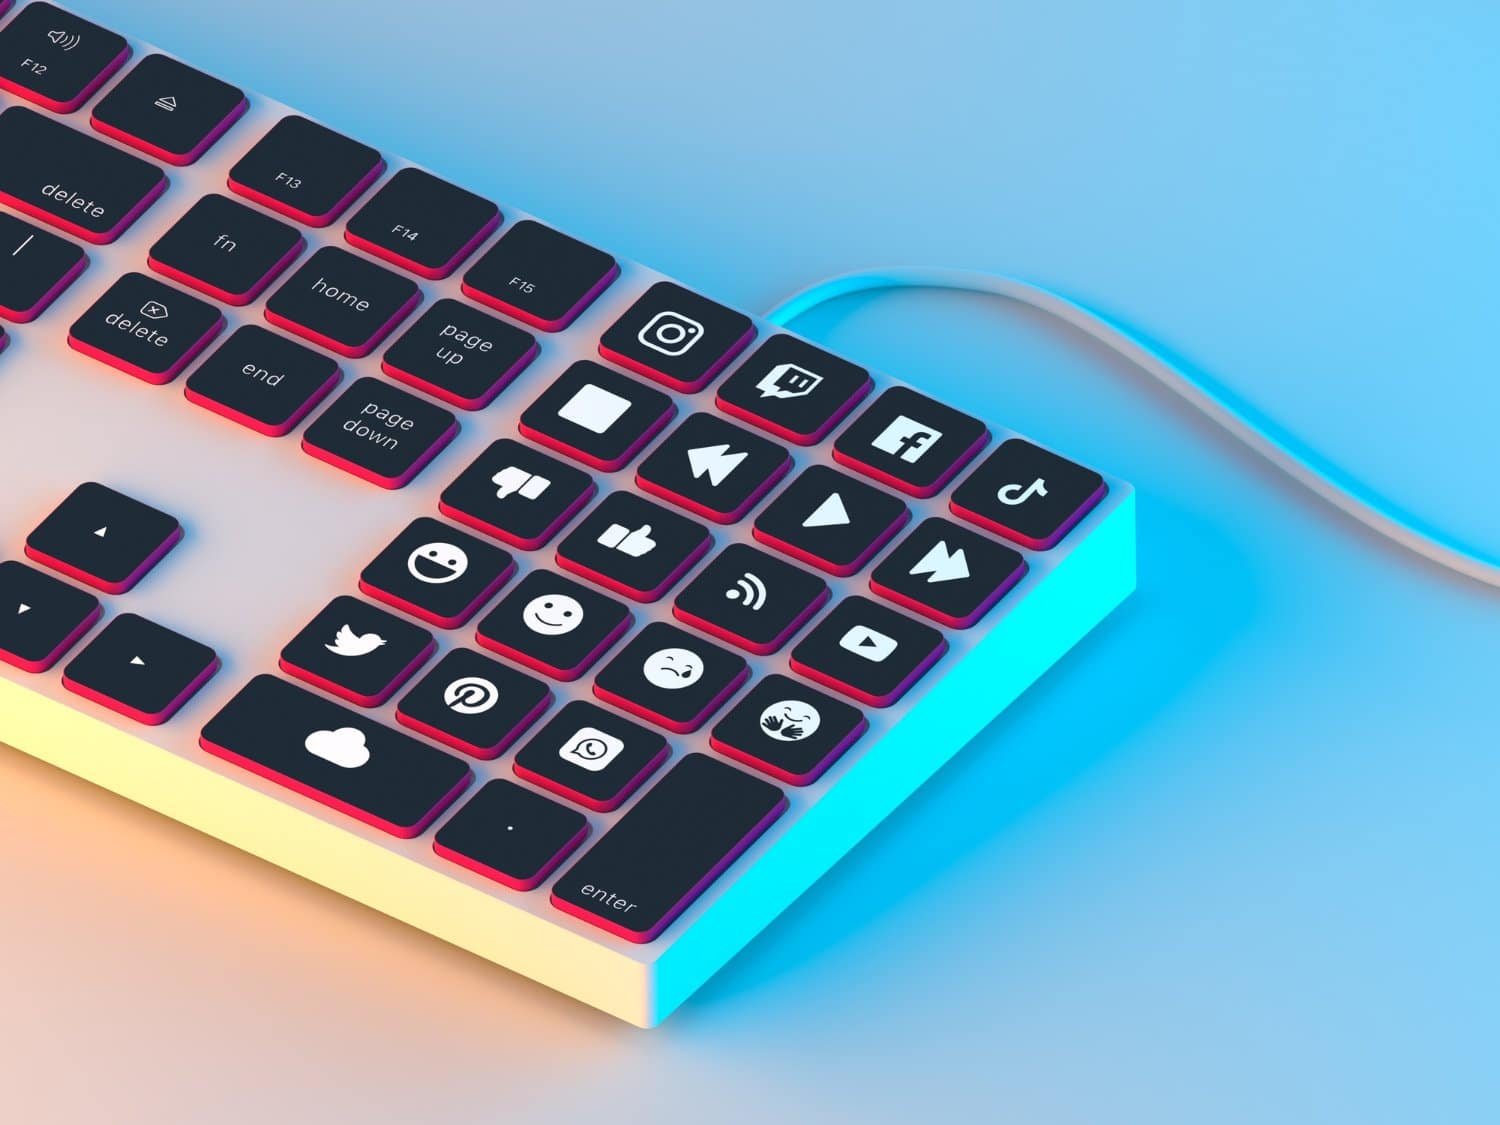 Keyboards with Programmable Keys for Productivity